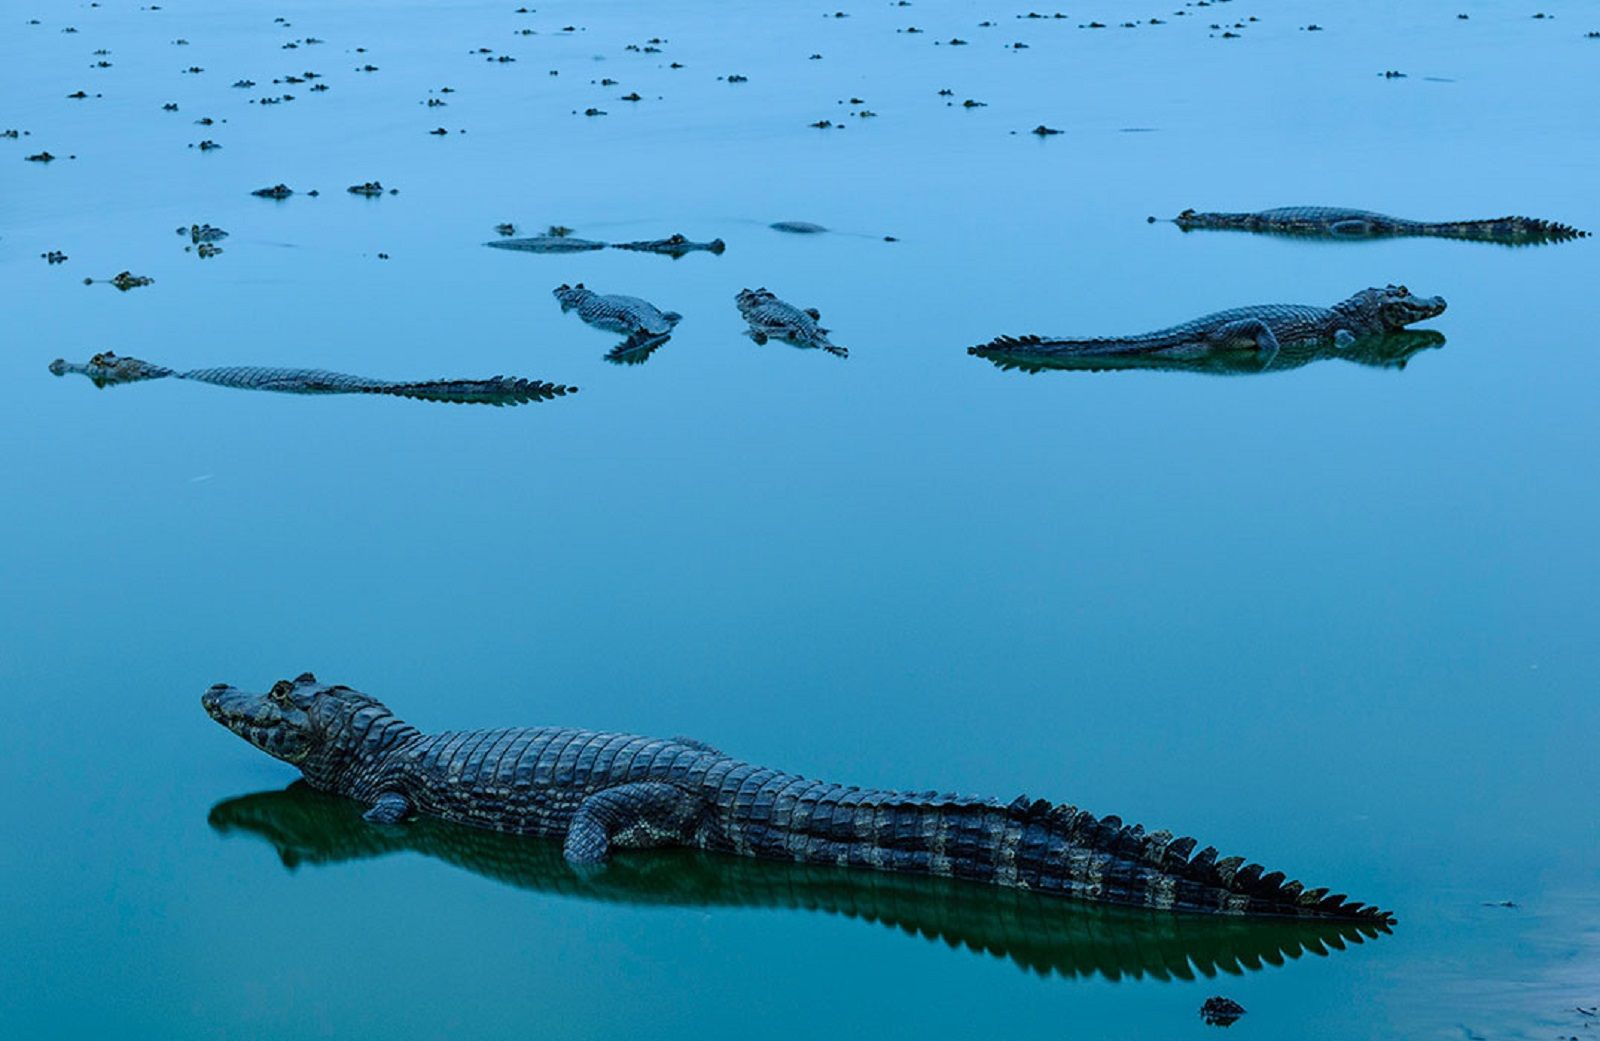 Stunning photos from The Nature Conservancy 2018 global photo contest image 7